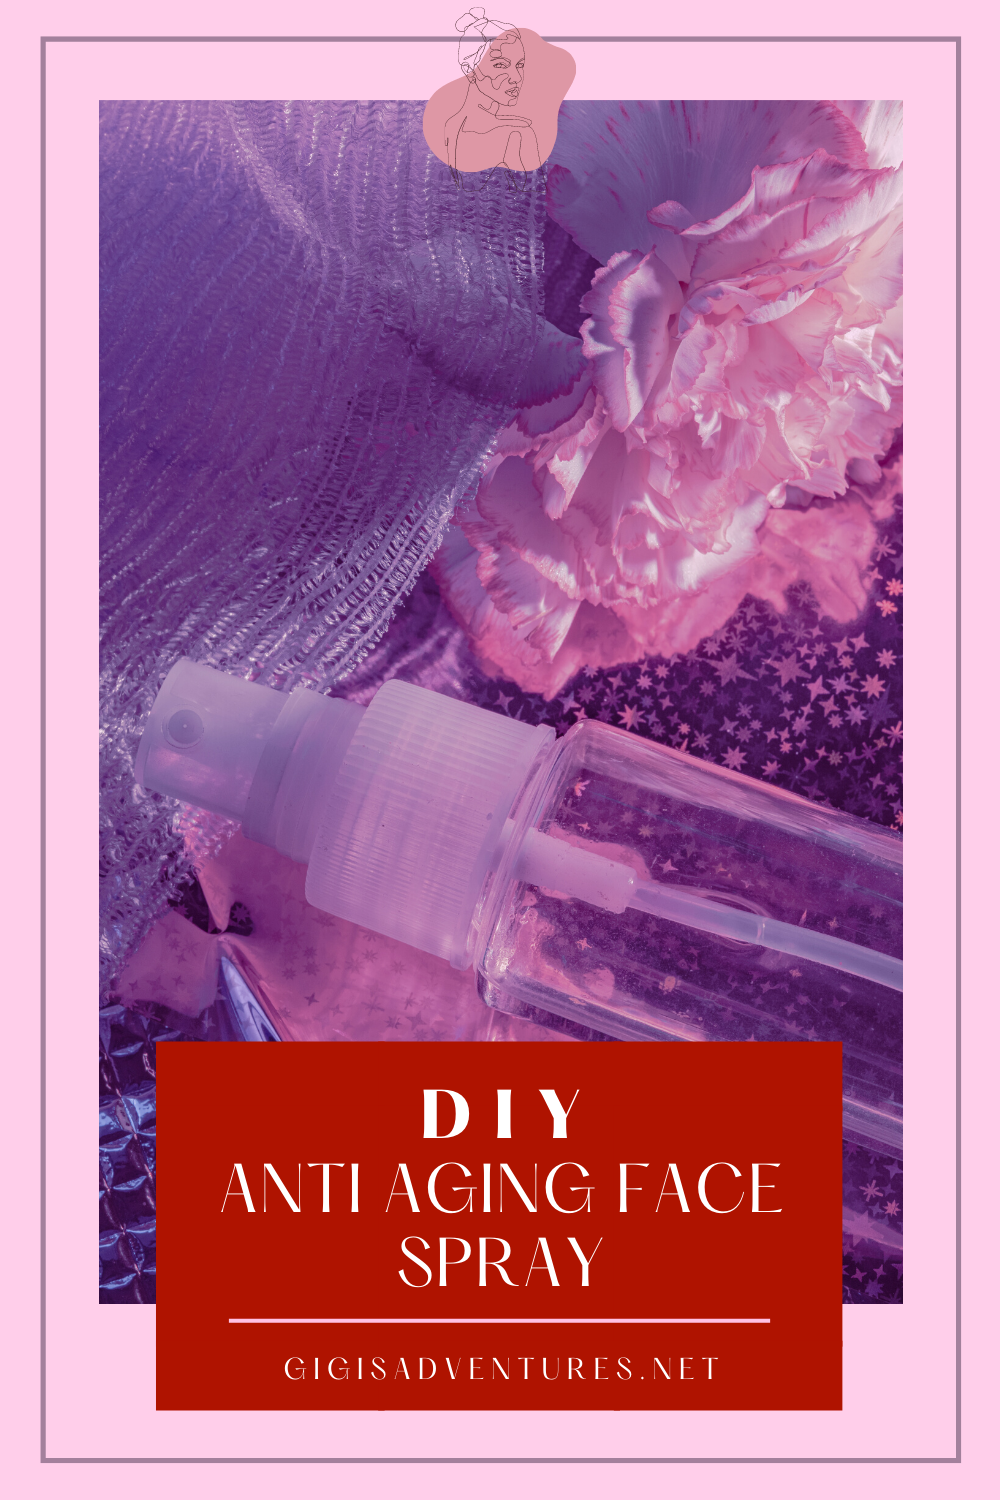 DIY Anti Aging Face Spray - Only 4 Ingredients, Super Easy and Effective